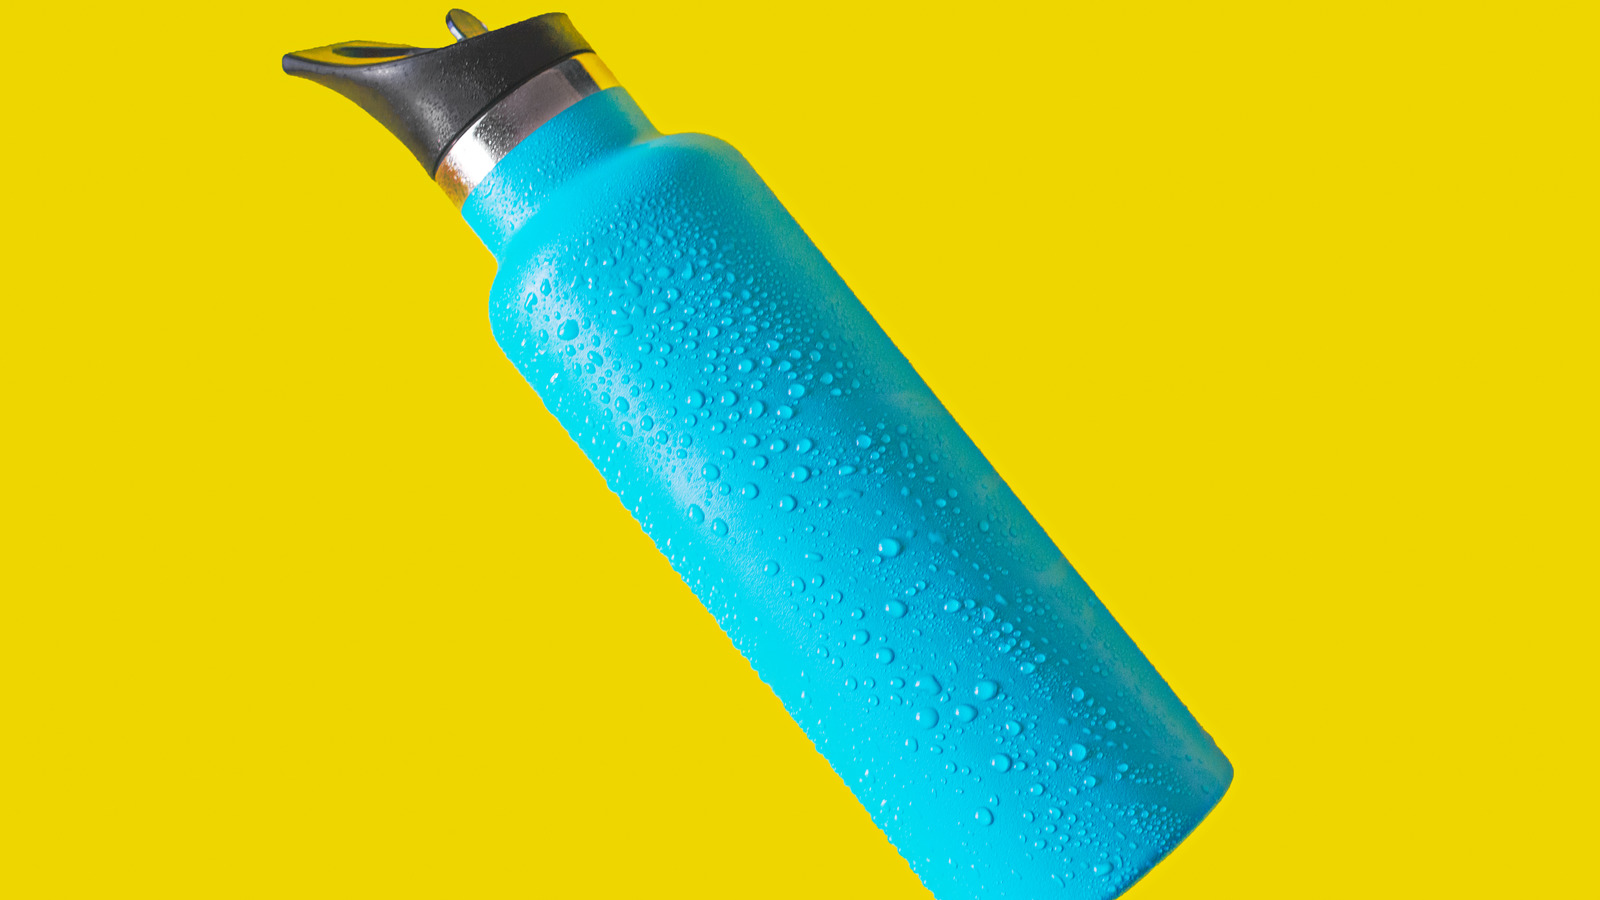 64 oz Cute Smile-Face Water Bottle with Sleeve BPA Free Half